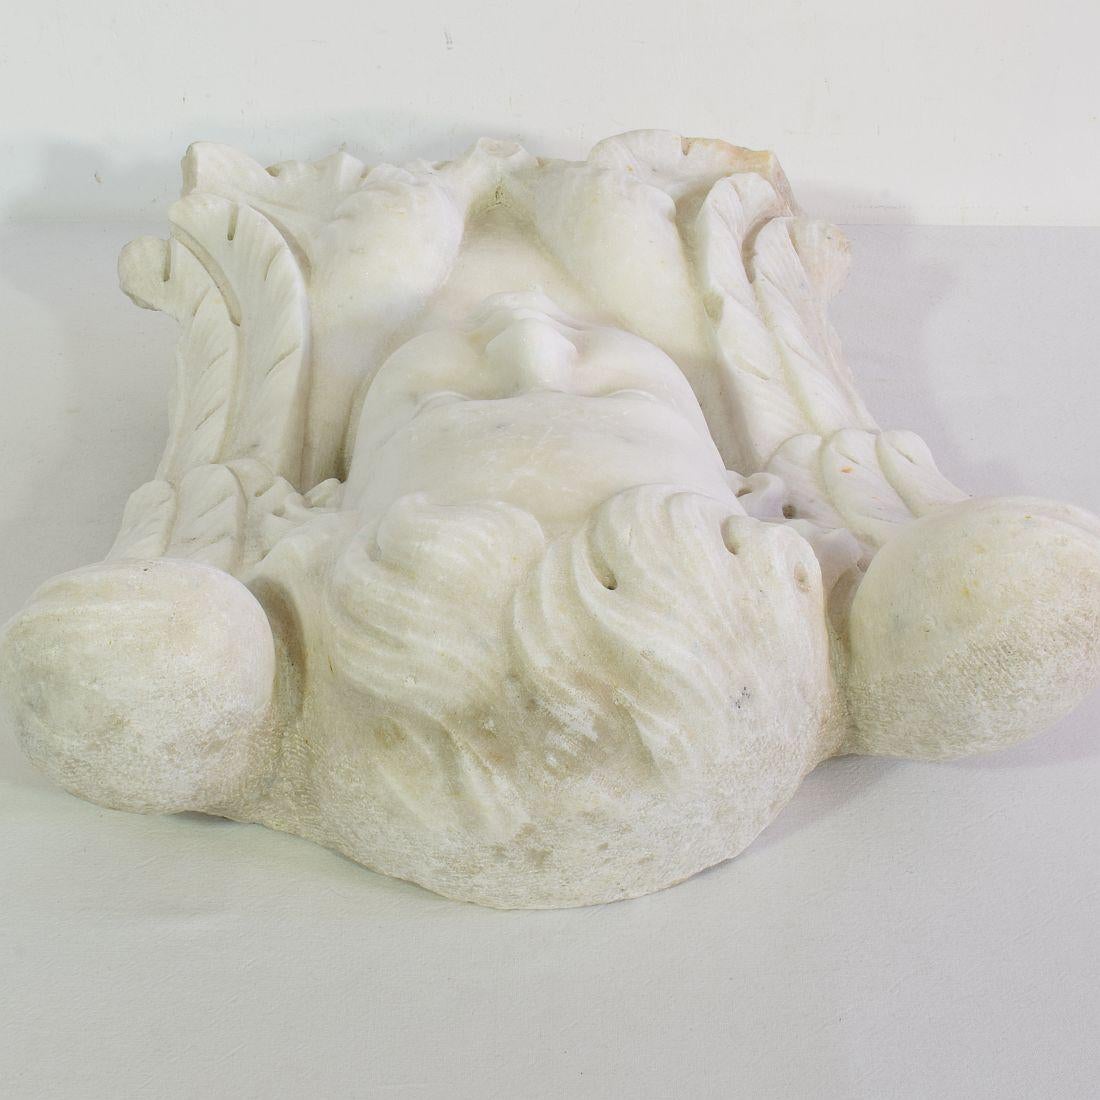 Italian, 17th / 18th Century Carved White Marble Winged Angel Head Ornament For Sale 10